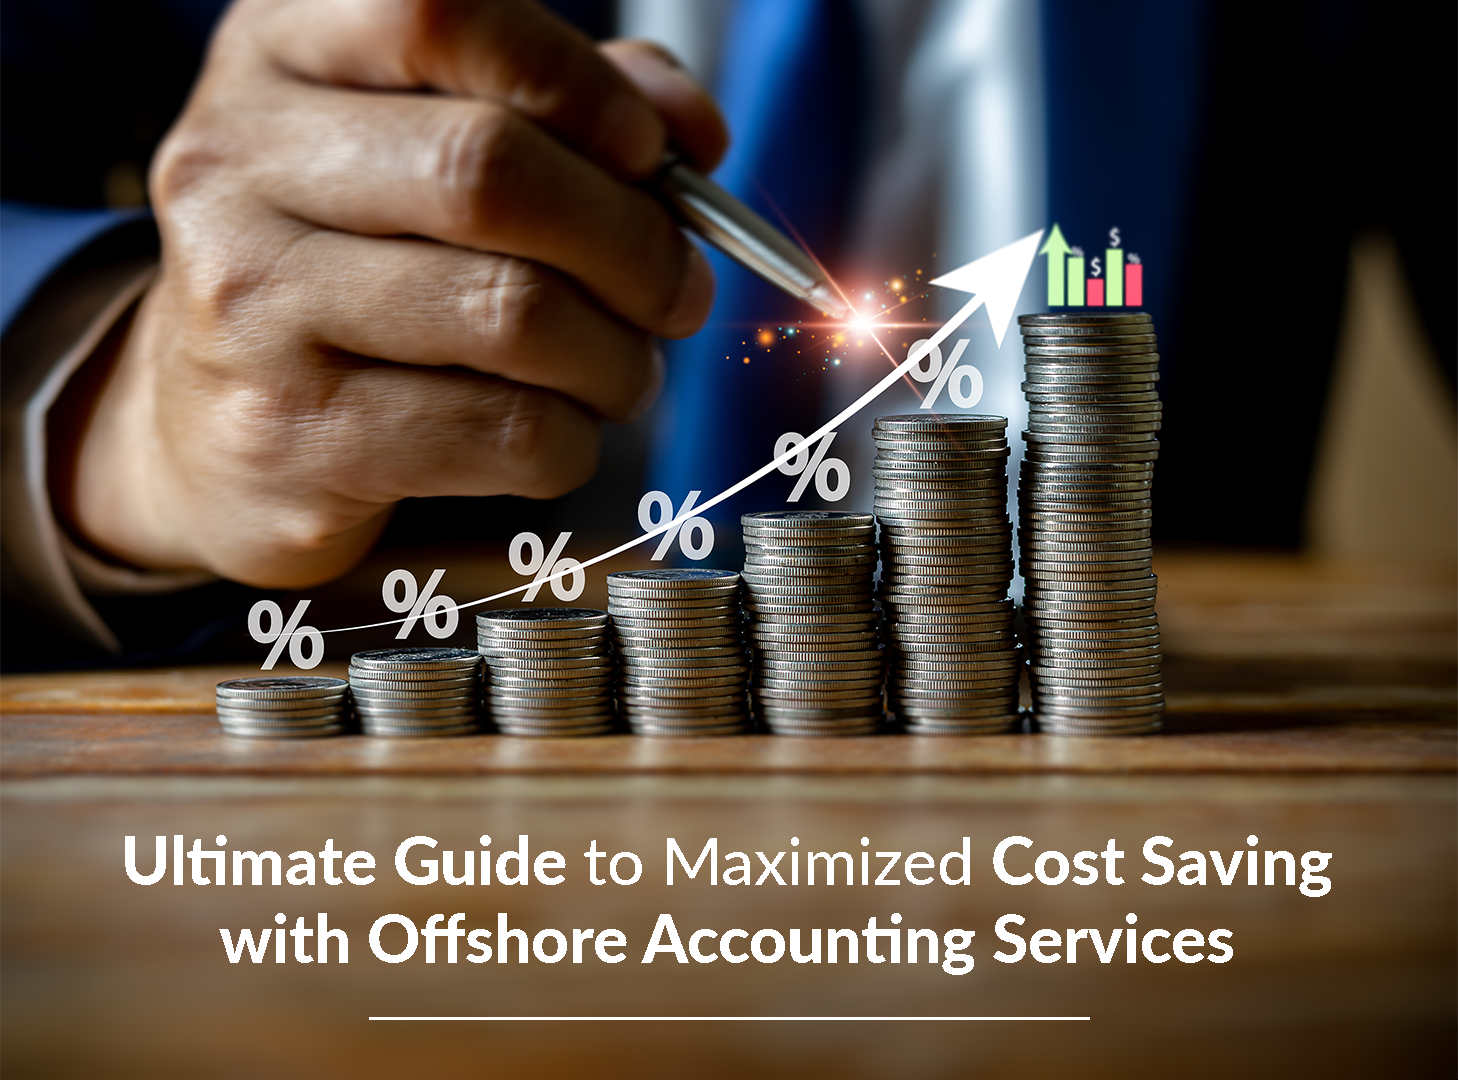 Ultimate Guide to Maximized Cost Savings with Offshore Accounting Services